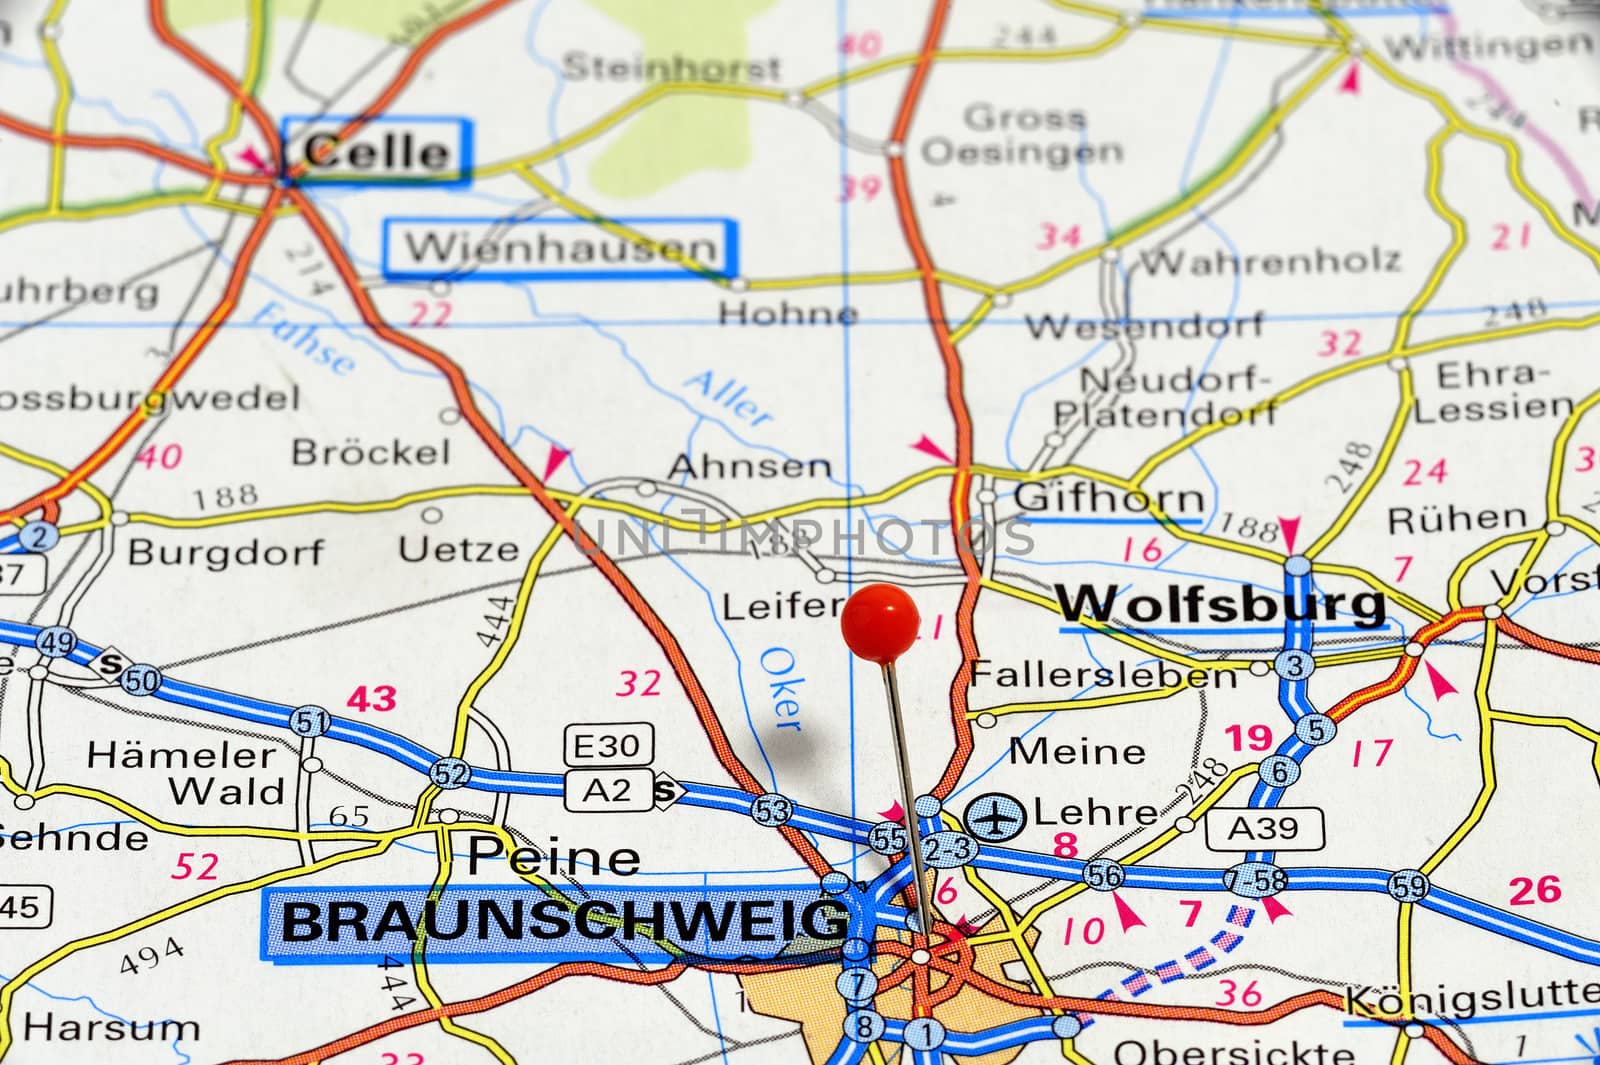 Closeup map of Braunschweig. Braunschweig is an important industrial and research city in southeast Niedersachsen, Germany